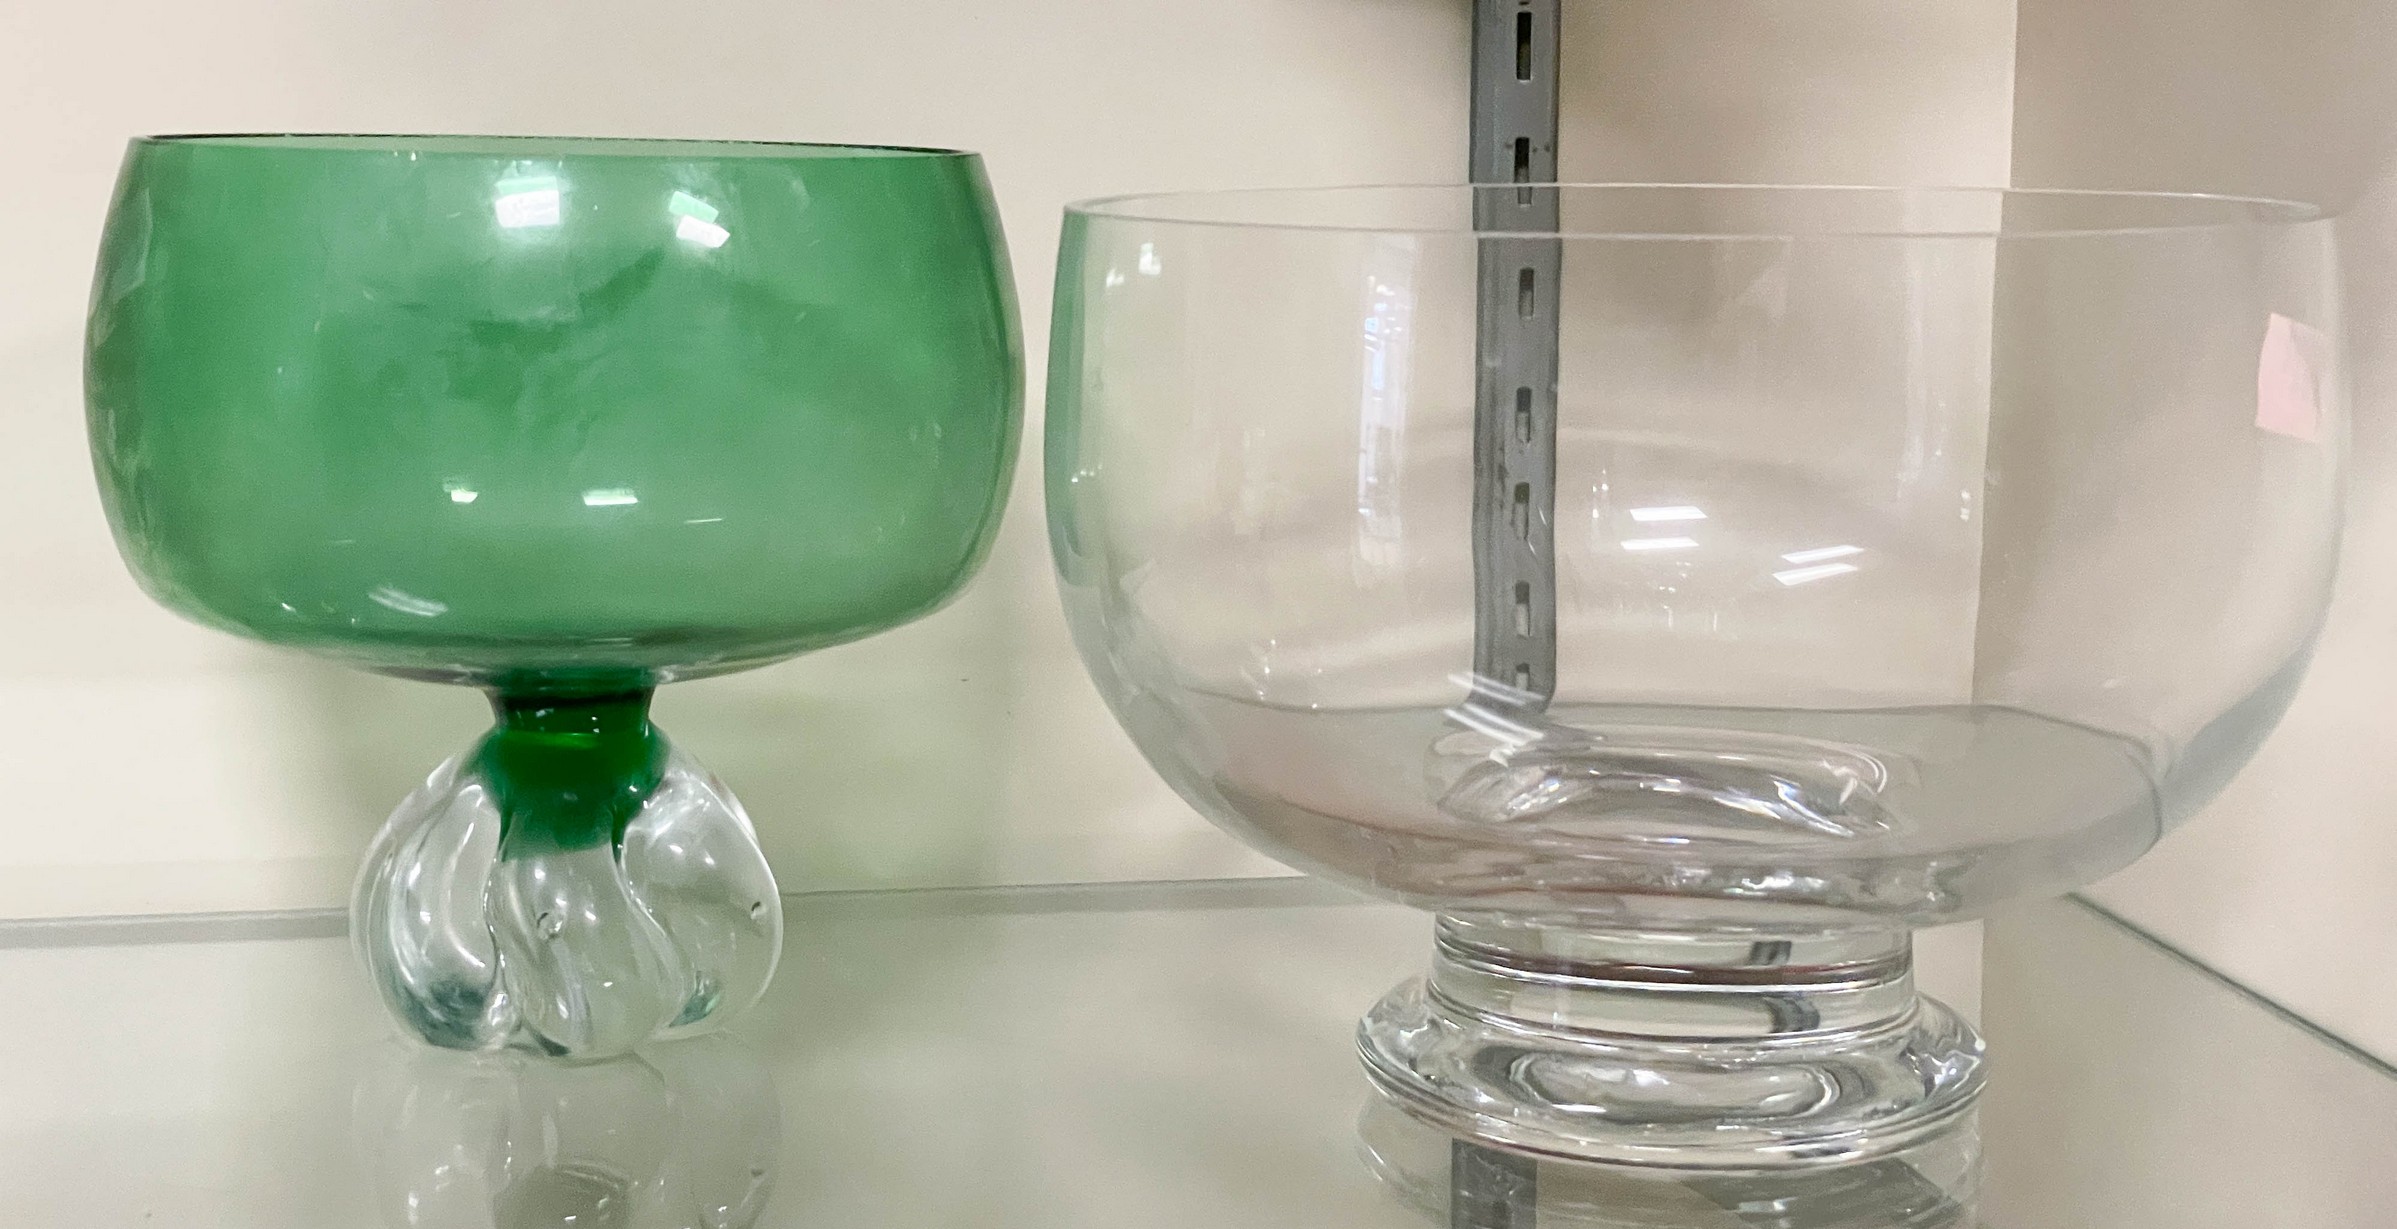 (2) Glass bowls, c/o unmarked green